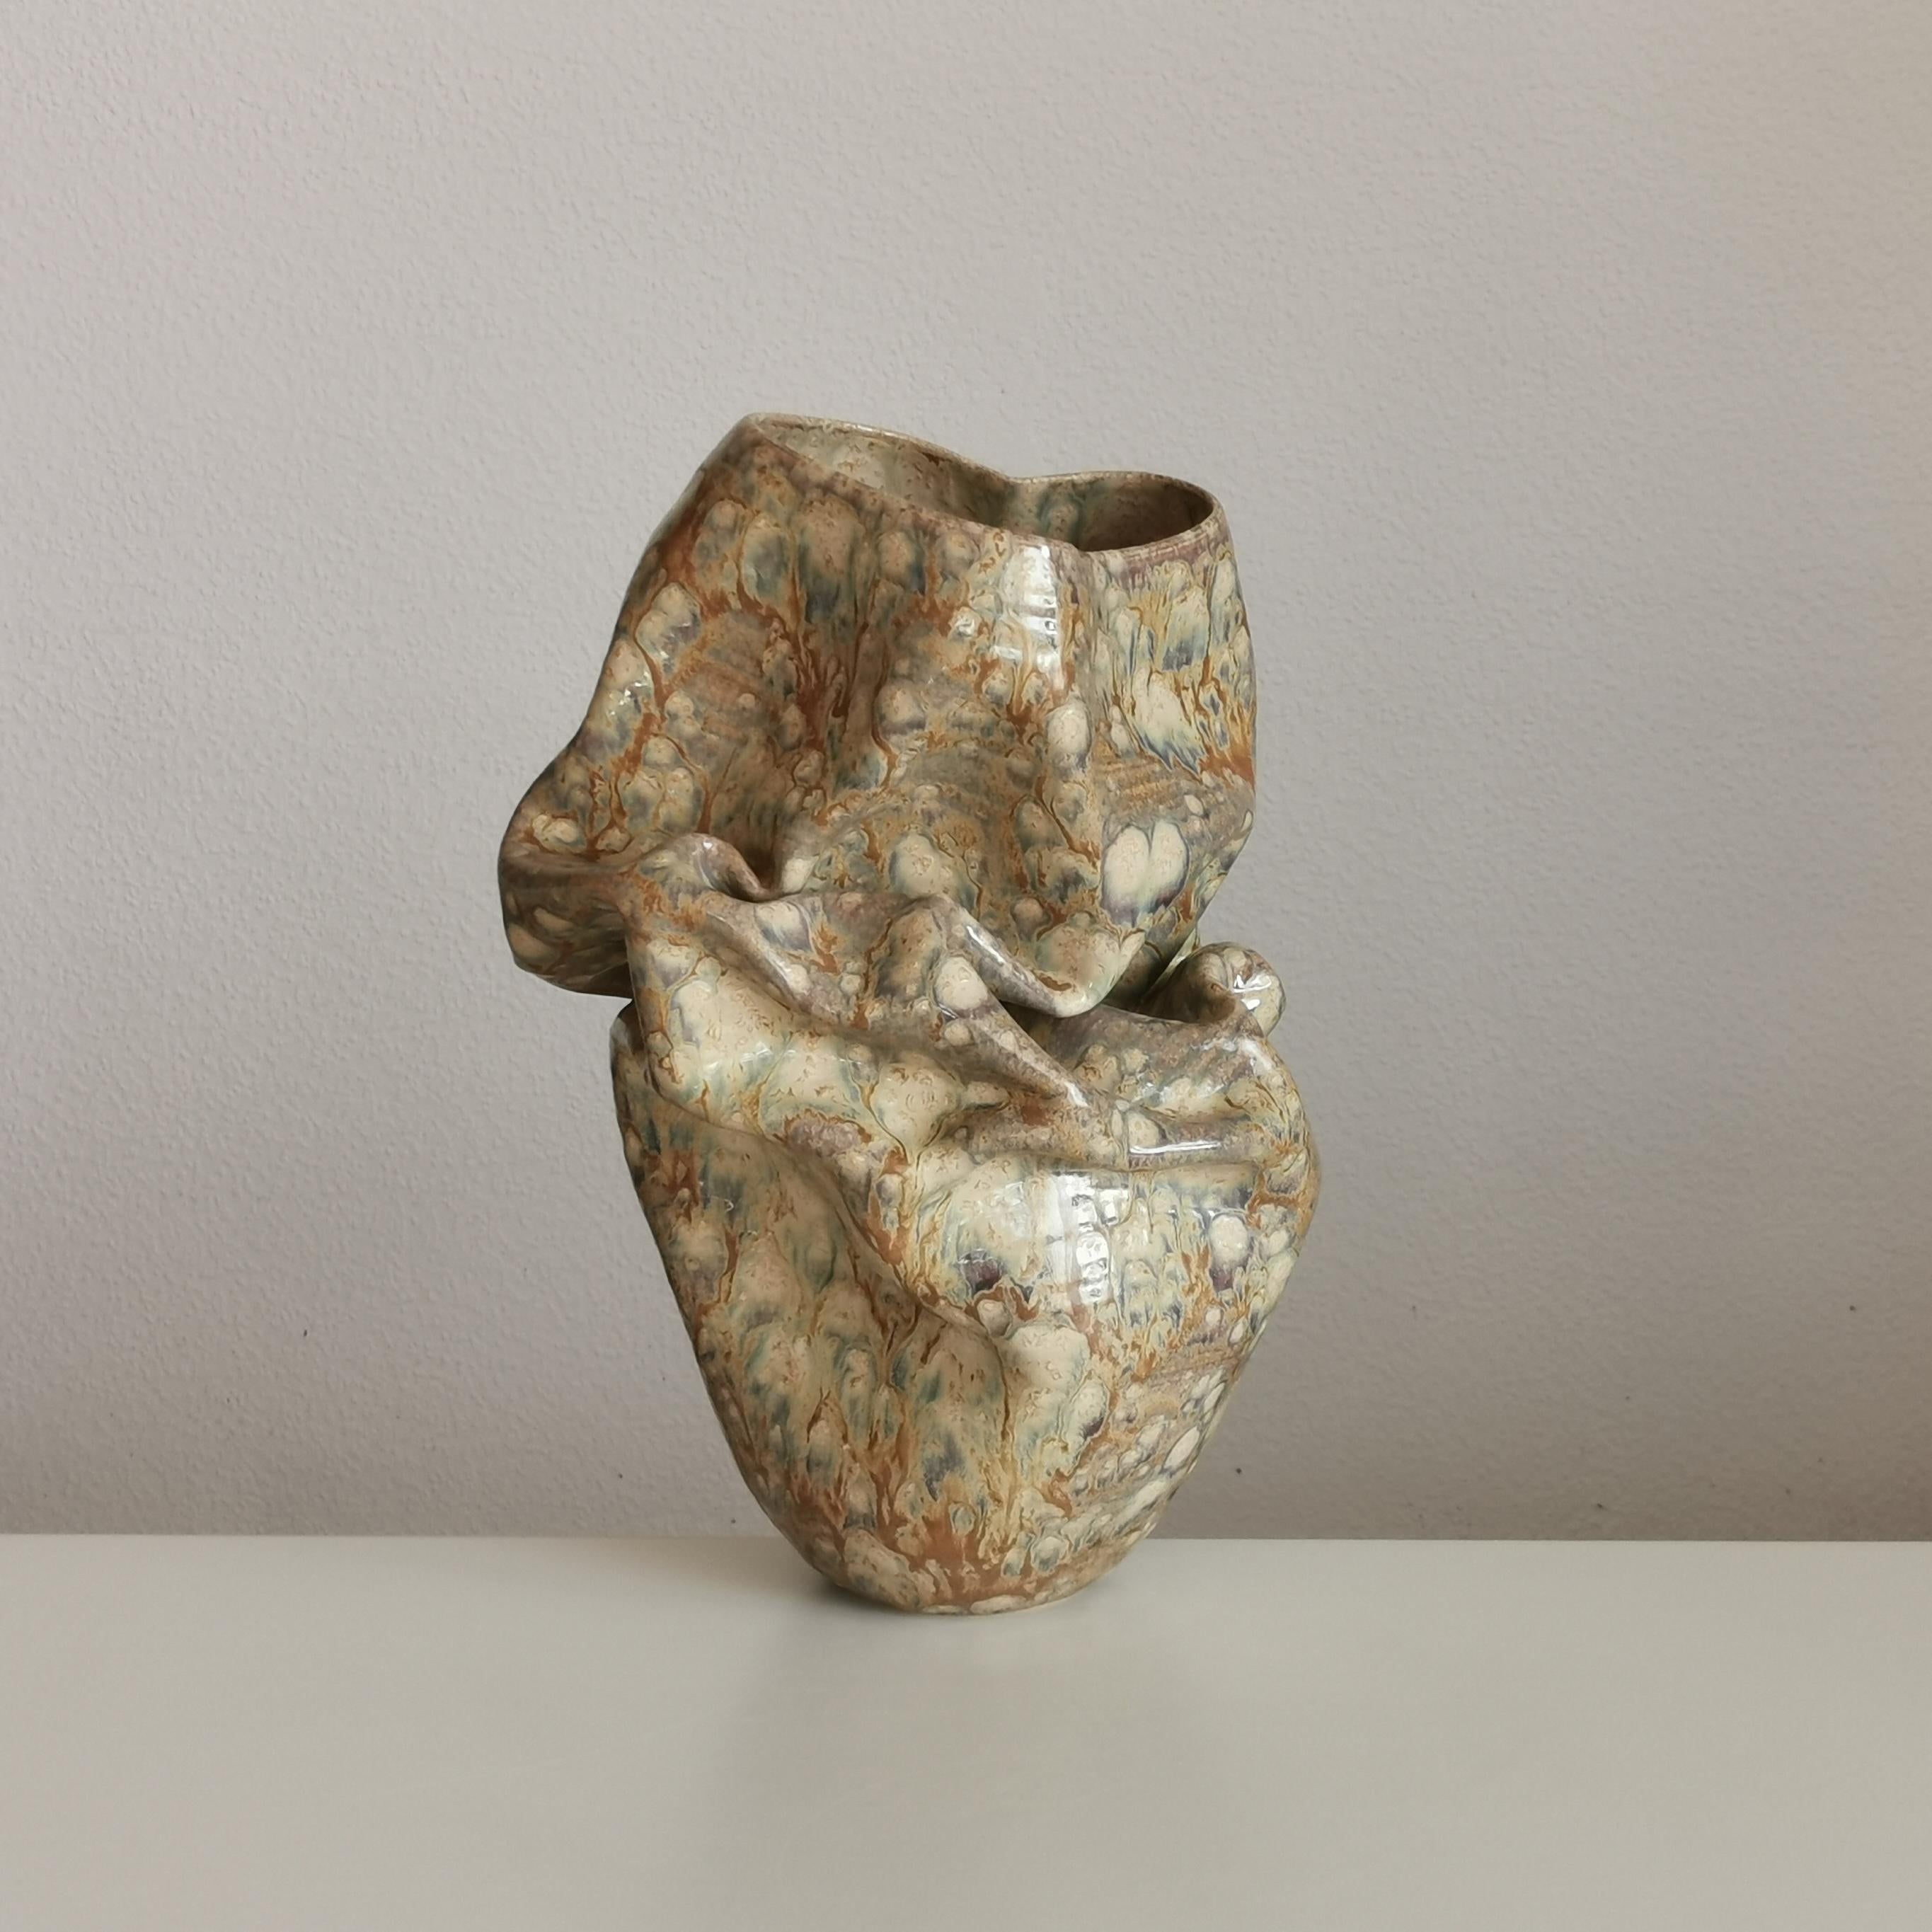 Medium Collapsed Crumpled Form with Desert Dust Glaze, Vessel N.127, Interior Sculpture, Objet D'Art

Vessel from ceramic artist Nicholas Arroyave-Portela.

White St.Thomas clay, stoneware glazes, multi fired to cone 6 (1223 degrees)

Made in